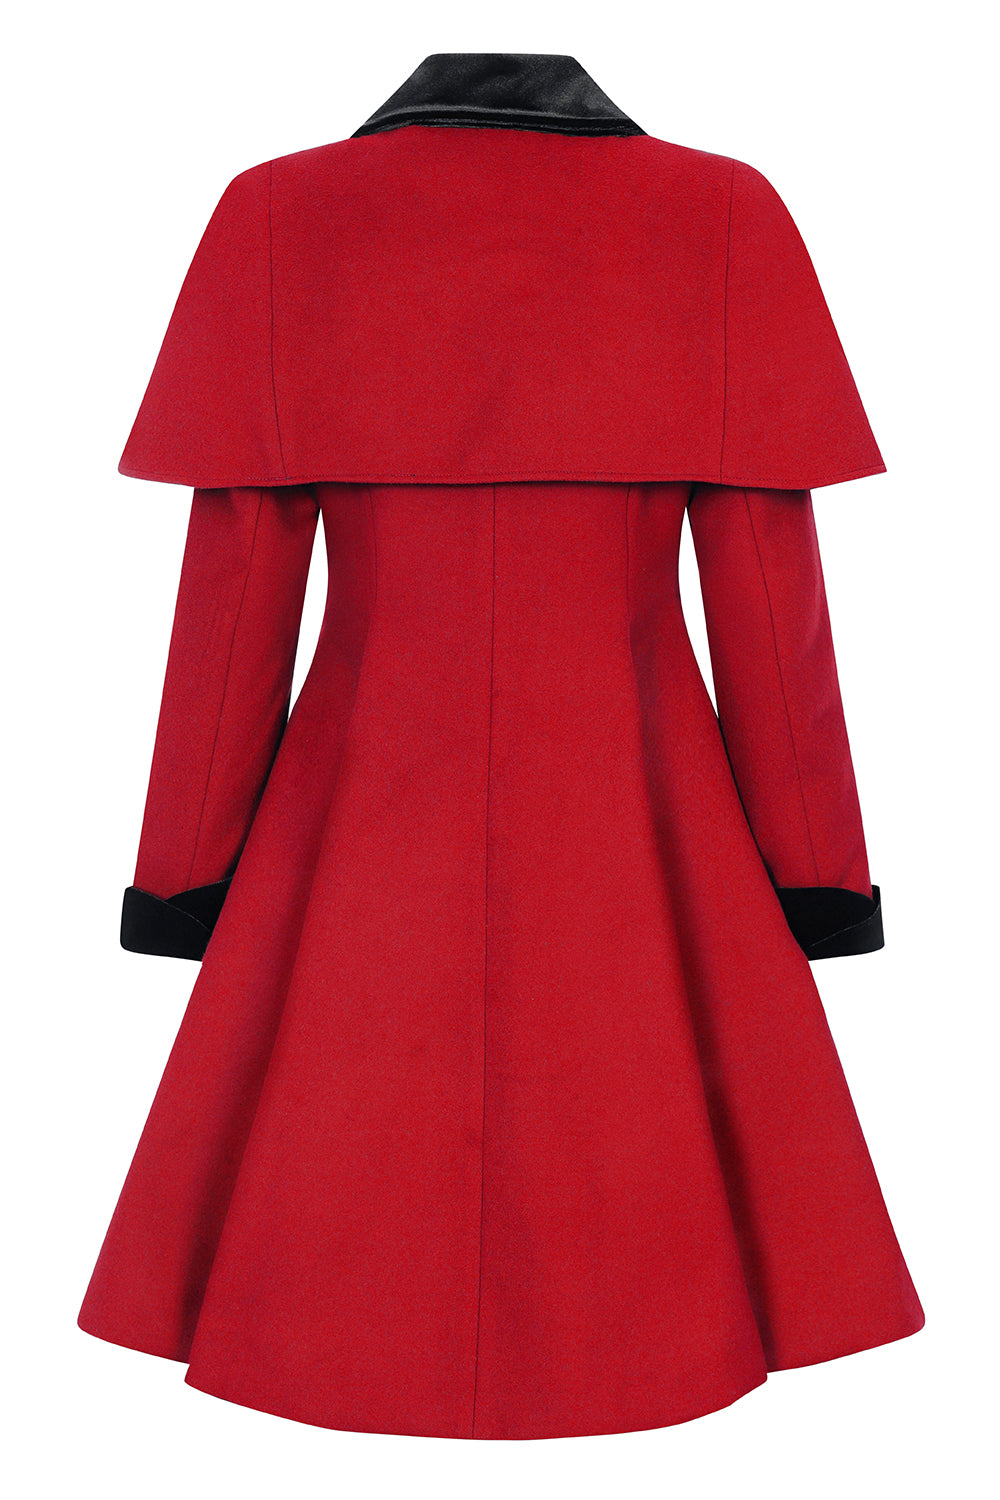 Red coat and matching red cape (back)